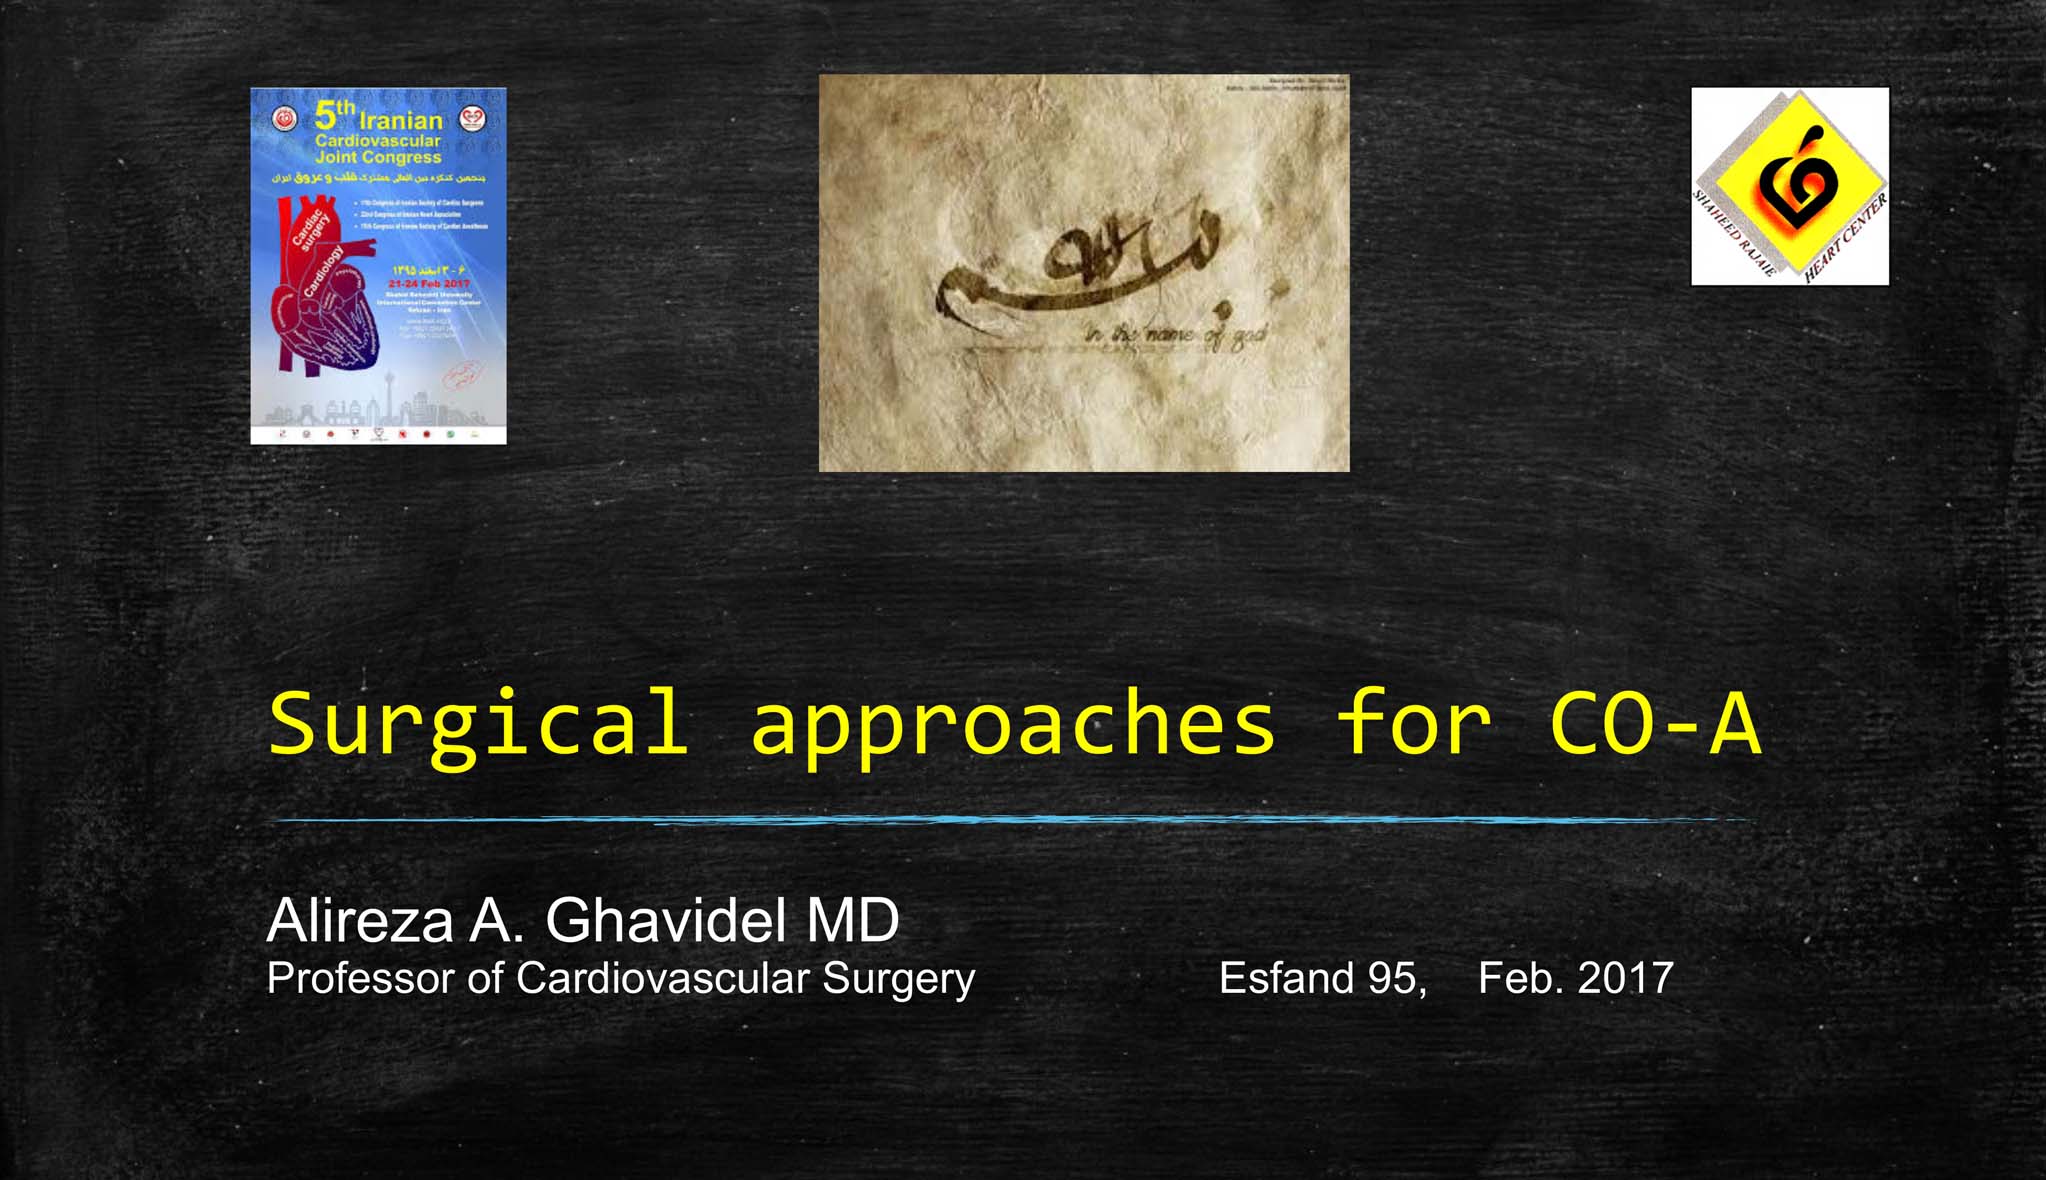 Surgical approaches for CO-A